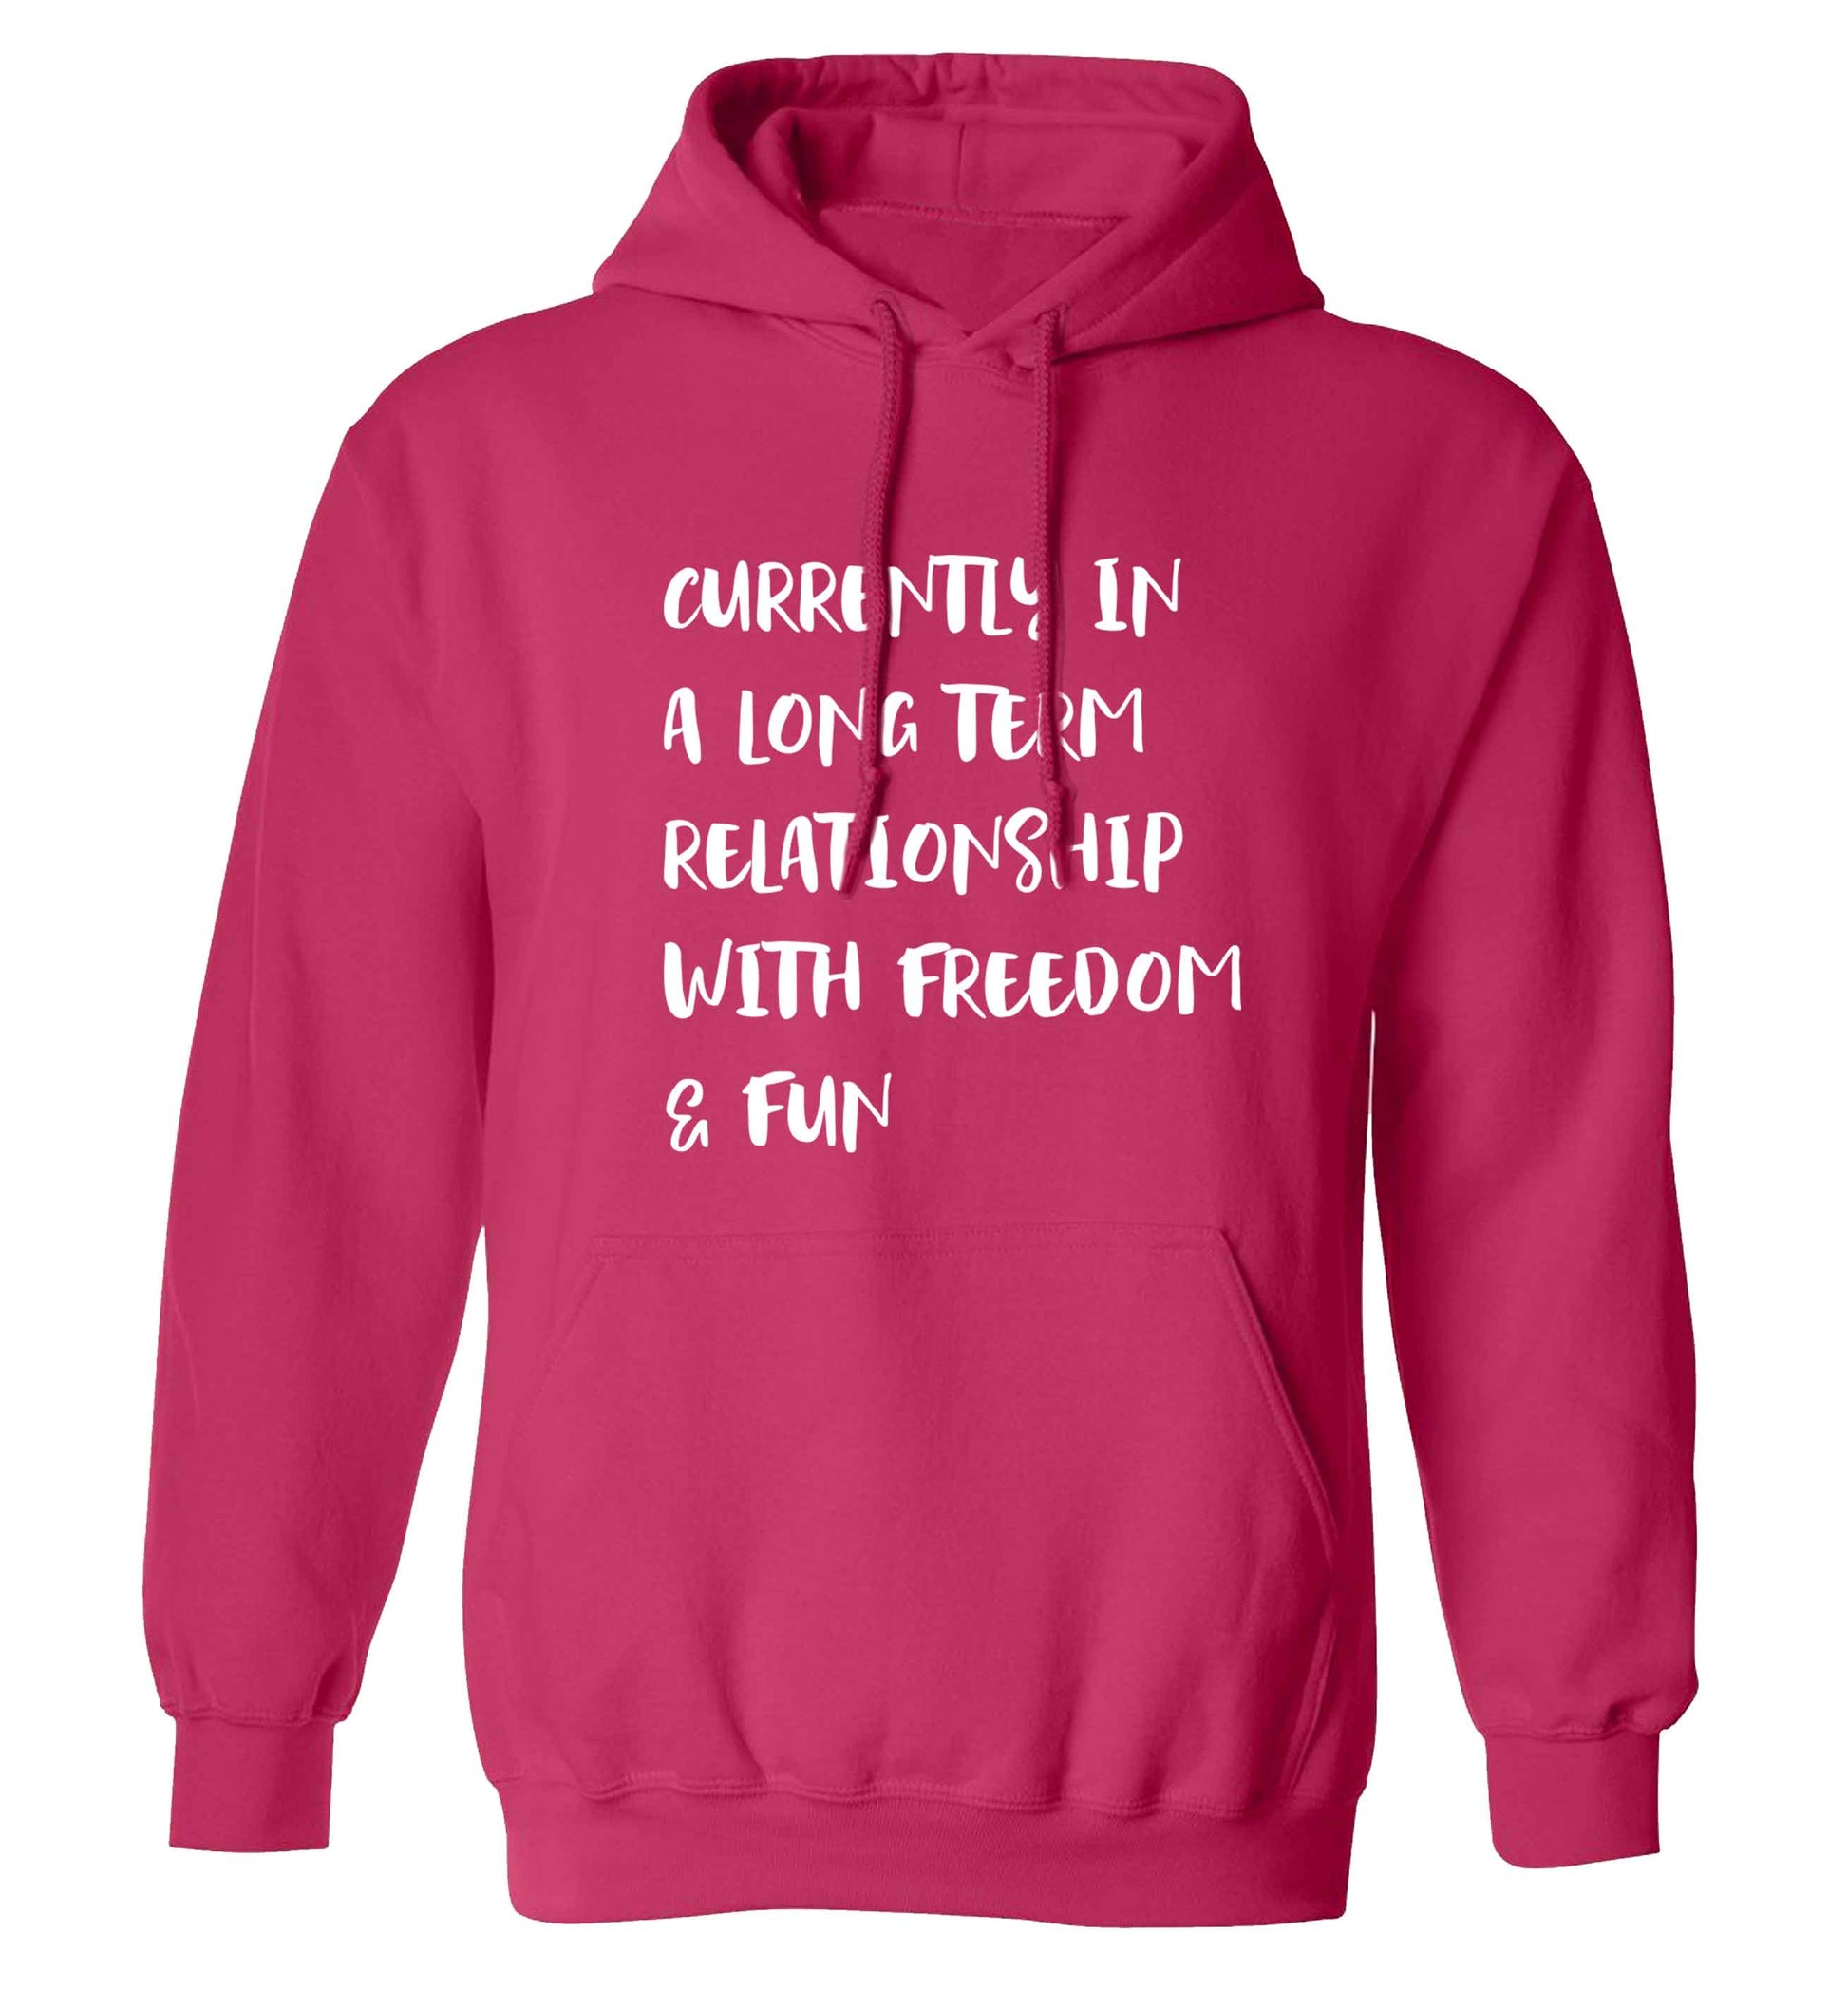 Currently in a long term relationship with freedom and fun adults unisex pink hoodie 2XL